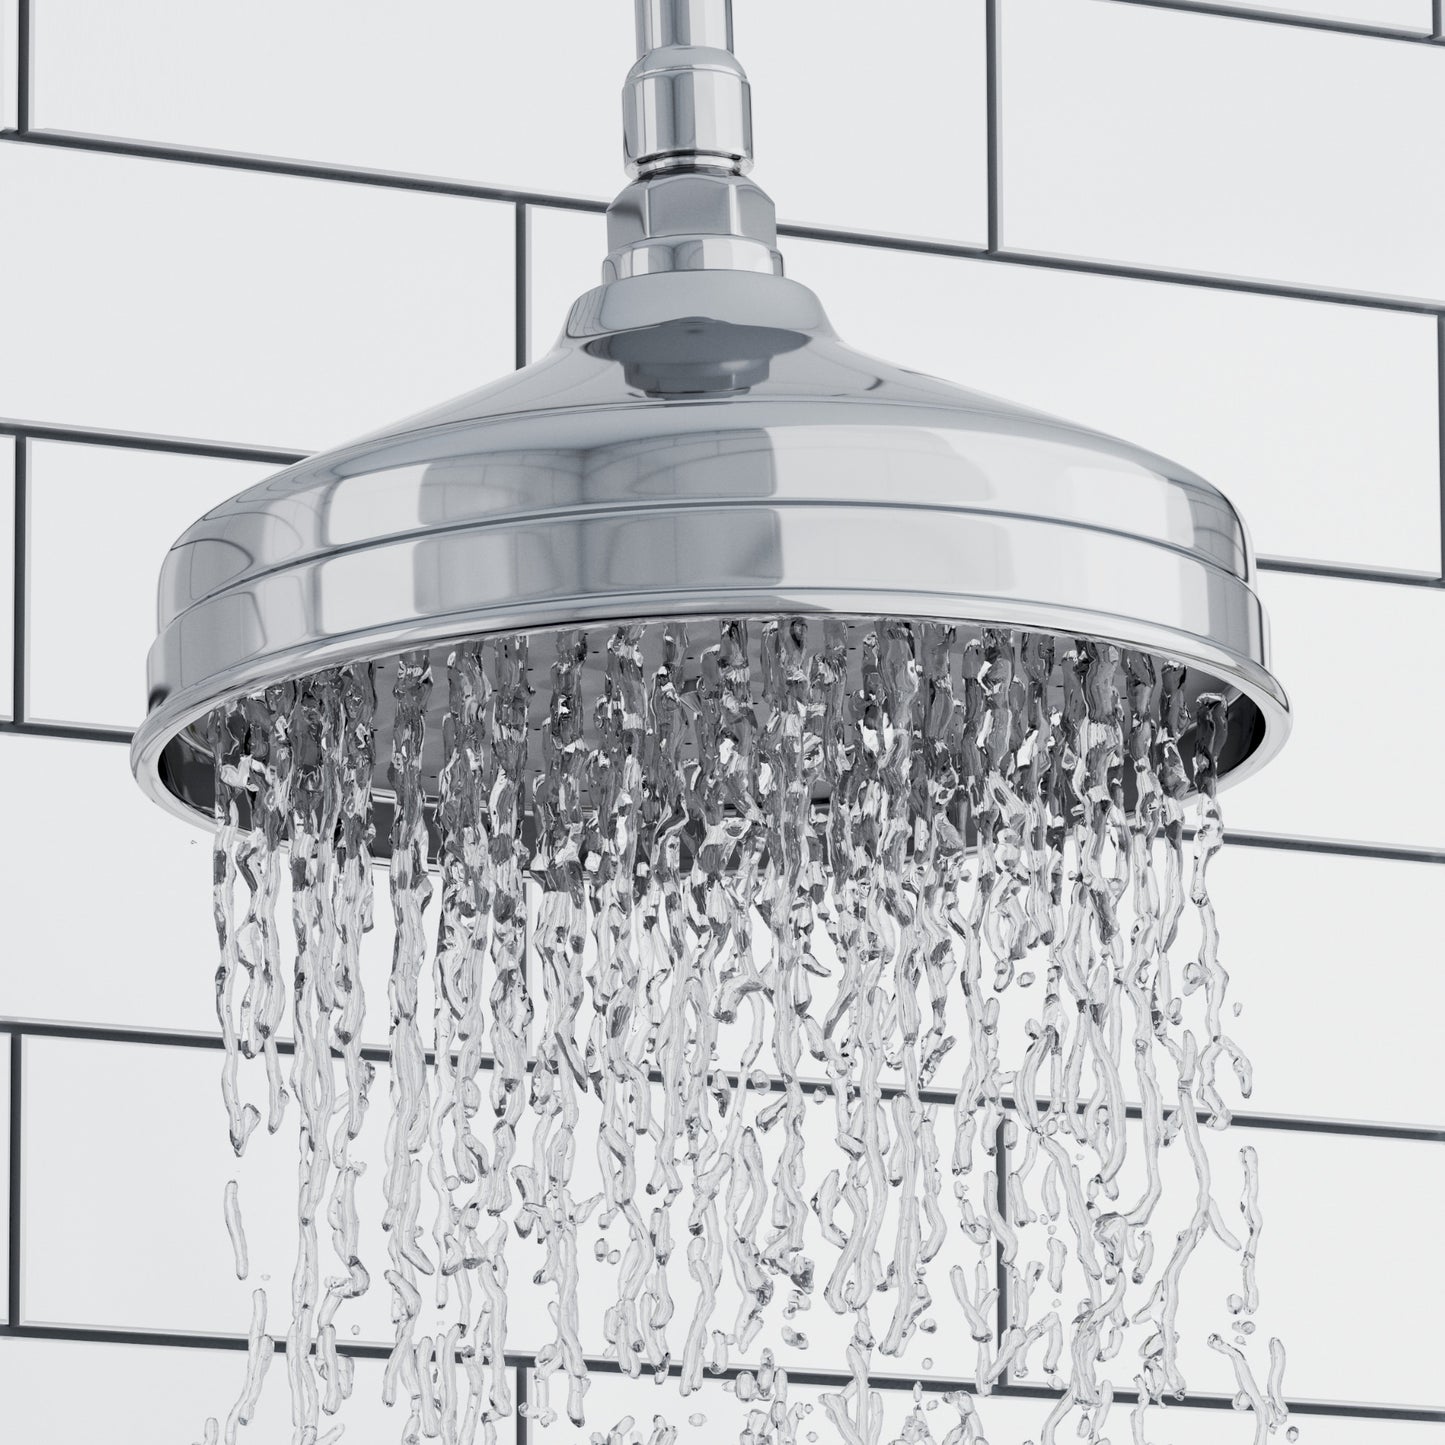 Traditional Ceiling Fixed Apron Brass Shower Head 8" With 180mm Ceiling Shower Arm - Chrome